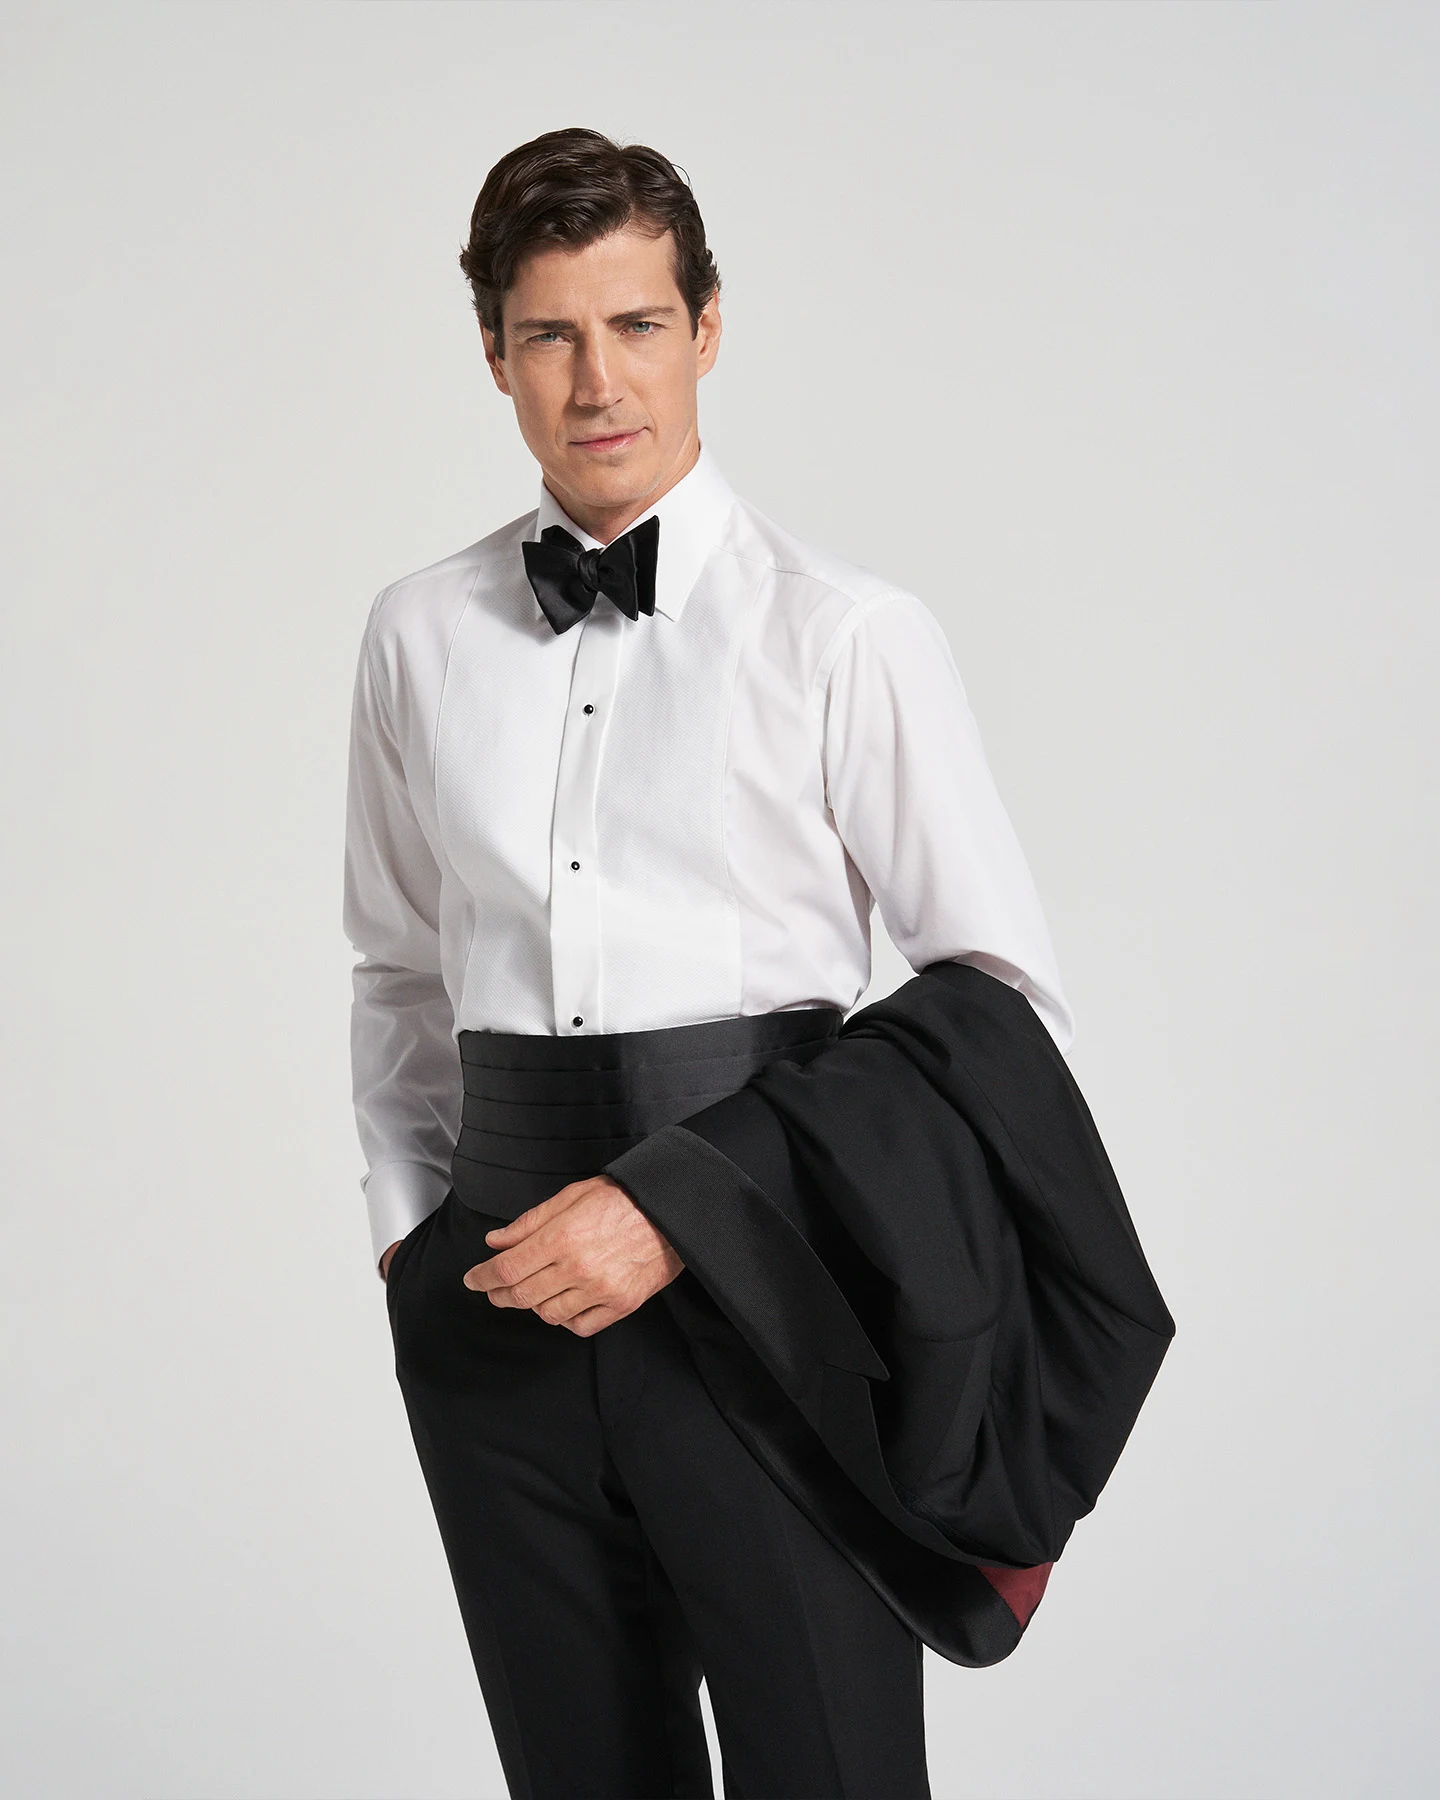 model in black tie with shirt and bowtie